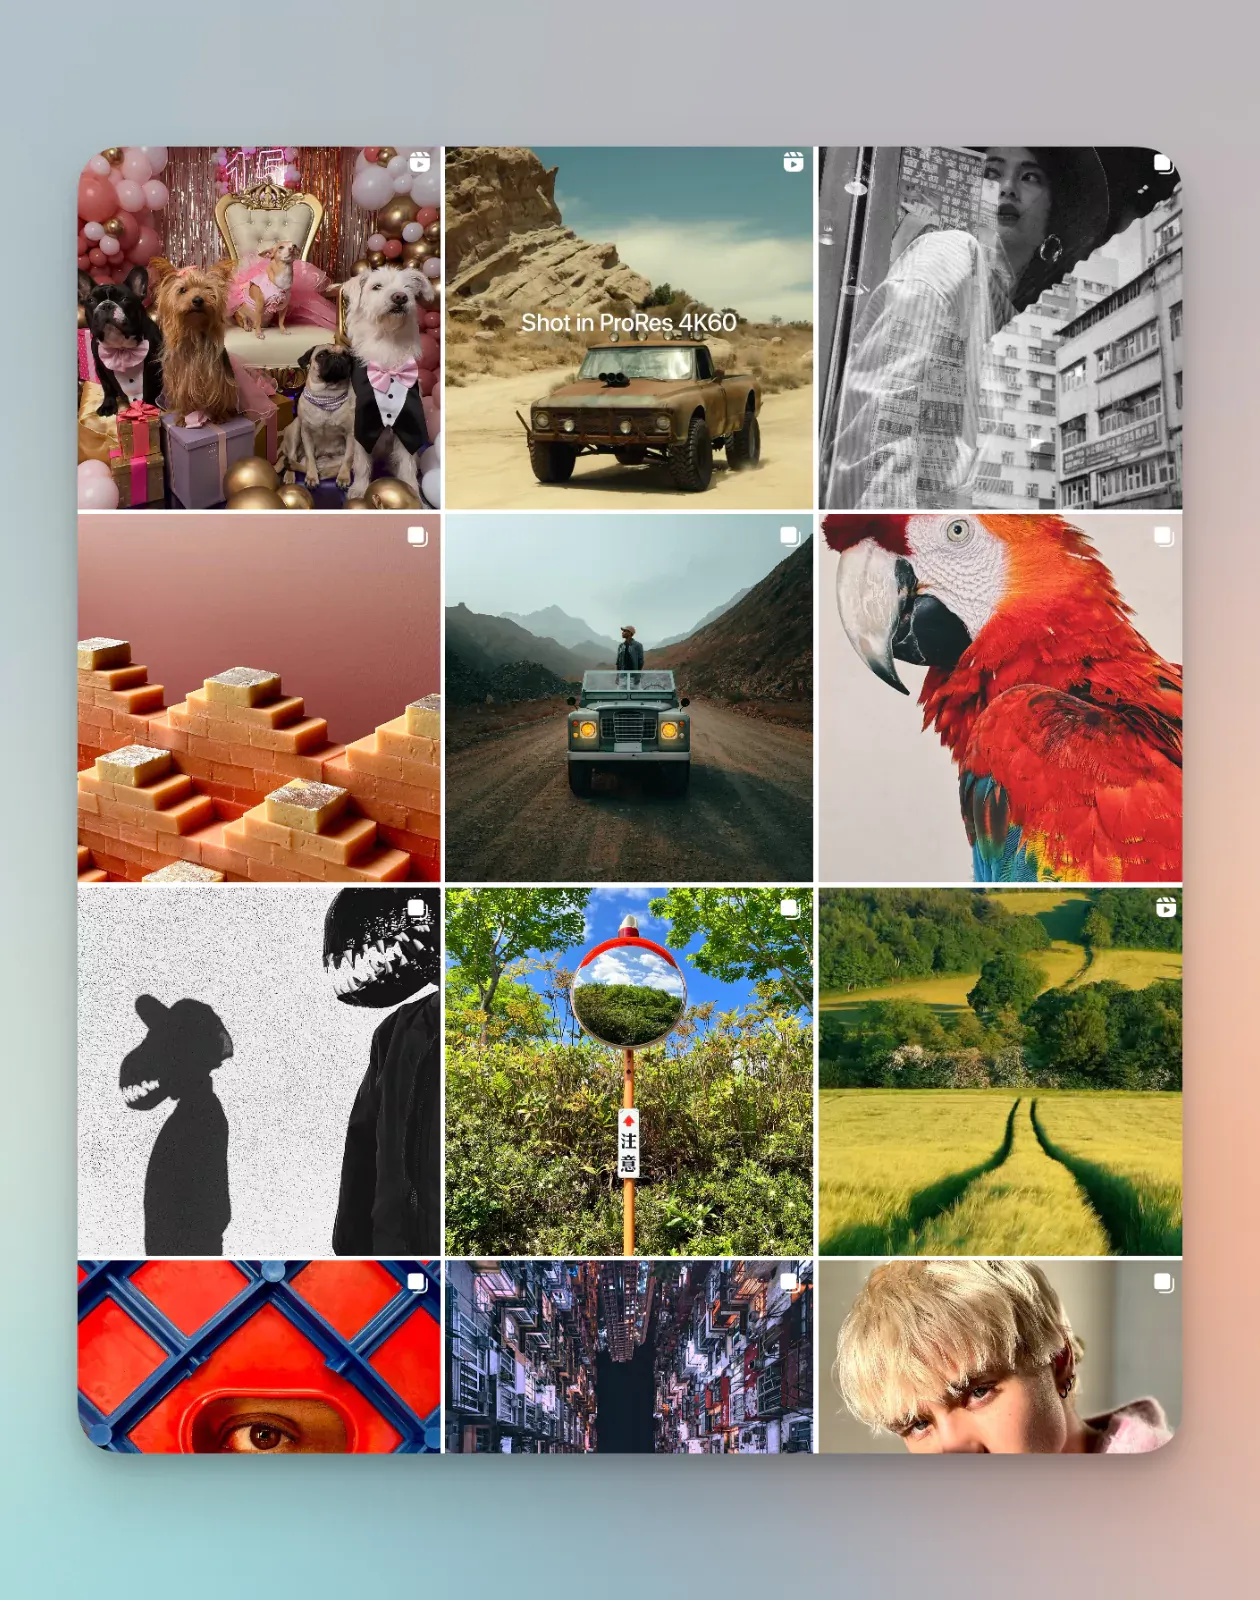 Here is a screenshot from Apple's Instagram feed that highlights its main content pillars themes